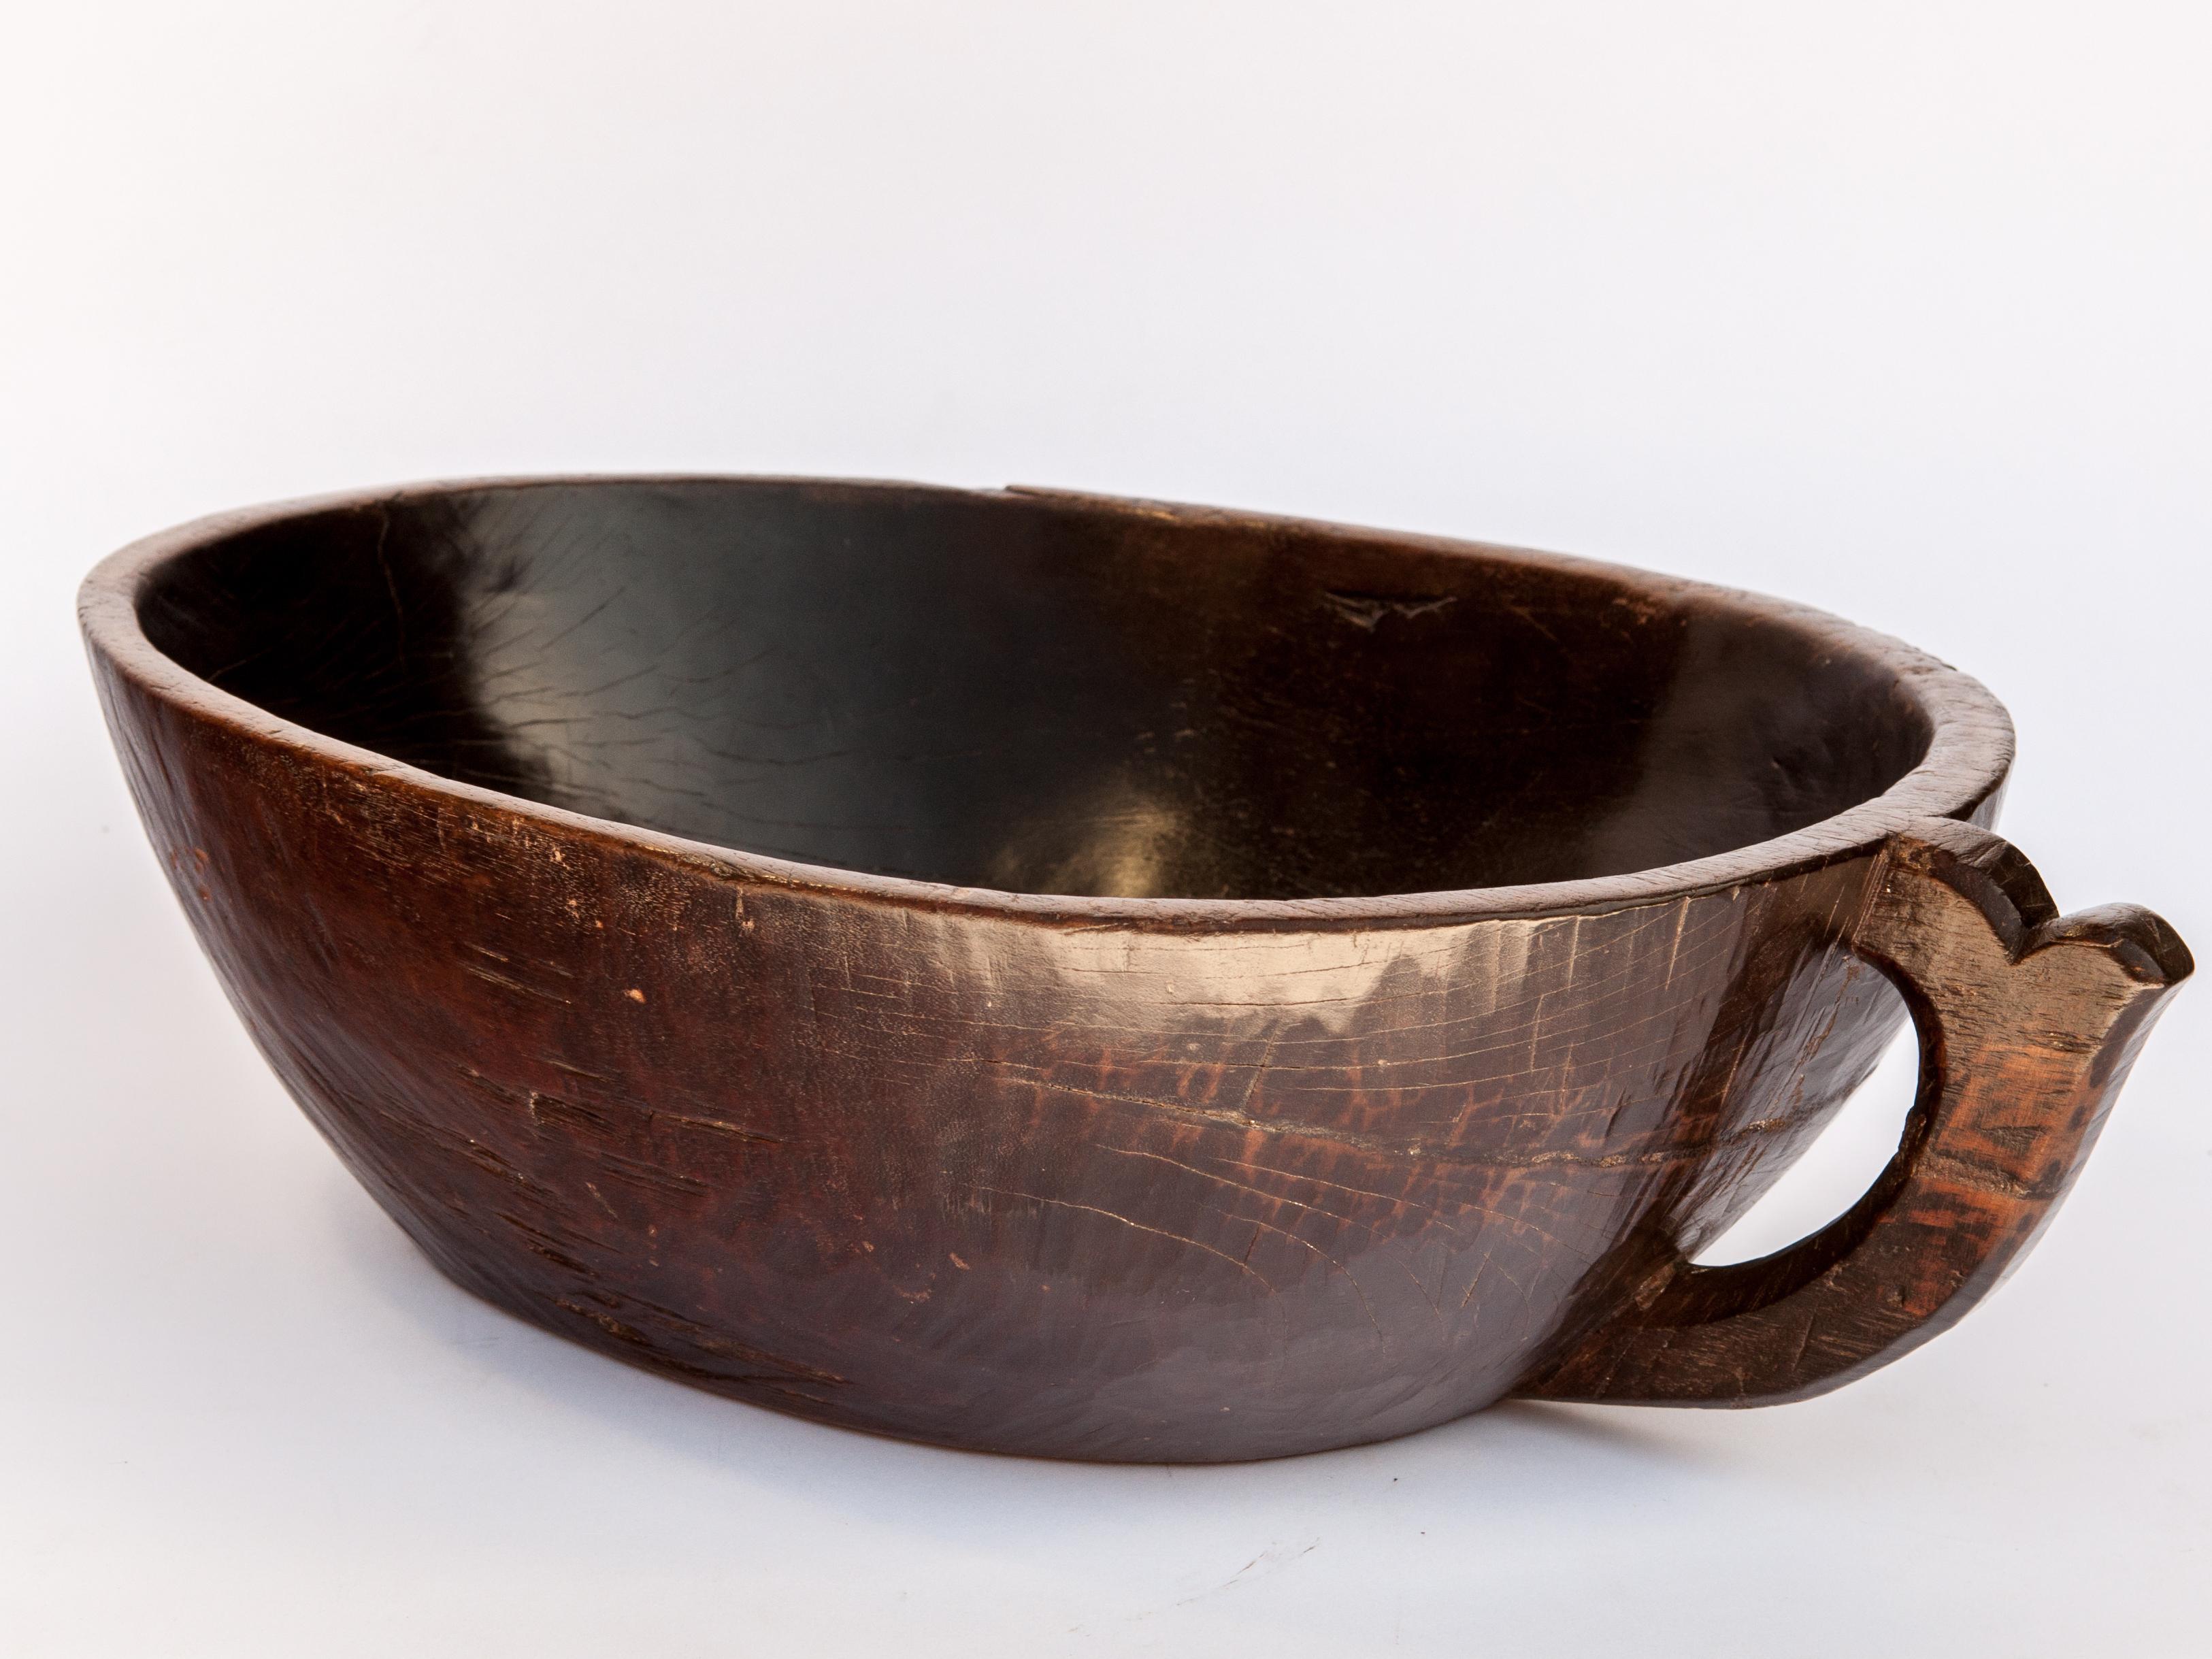 Indonesian Hand Hewn Wooden Bowl with Handle from Sulawesi, Indonesia, Mid-20th Century